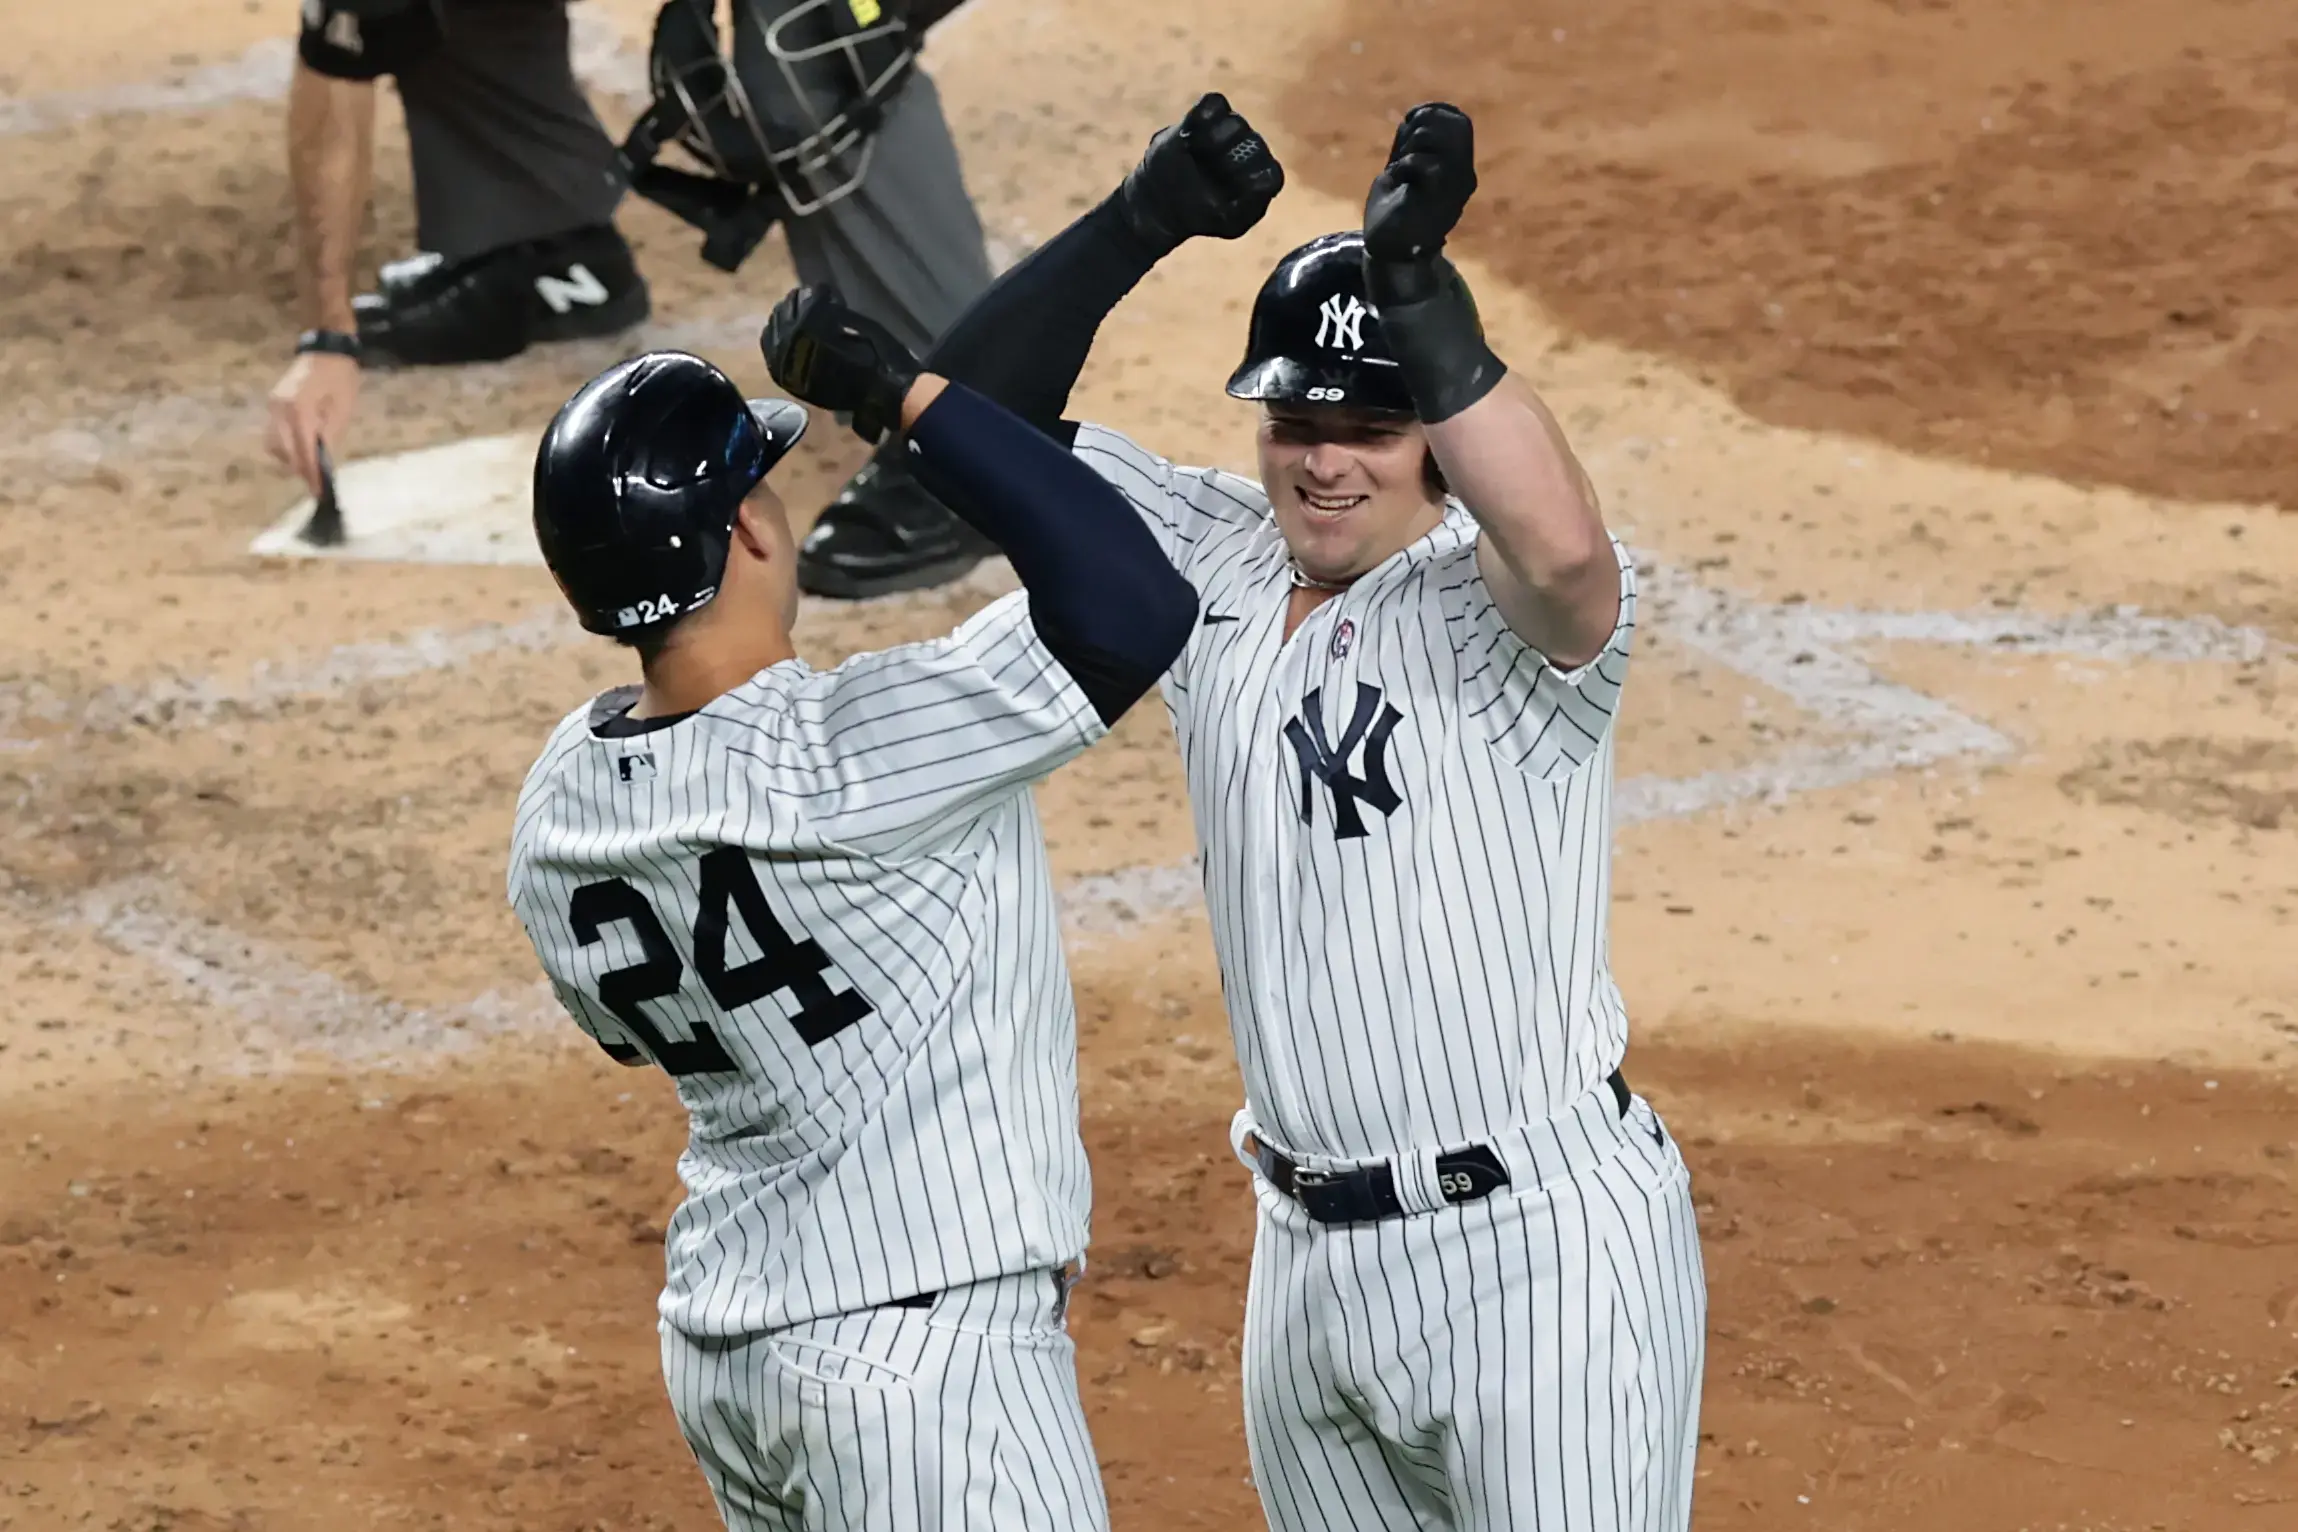 Sep 11, 2020; Bronx, New York, USA; New York Yankees first baseman Luke Voit (59) celebrates his second three run home run pf the game with catcher Gary Sanchez (24) during the fifth inning against the Baltimore Orioles at Yankee Stadium. Mandatory Credit: Vincent Carchietta-USA TODAY Sports / © Vincent Carchietta-USA TODAY Sports